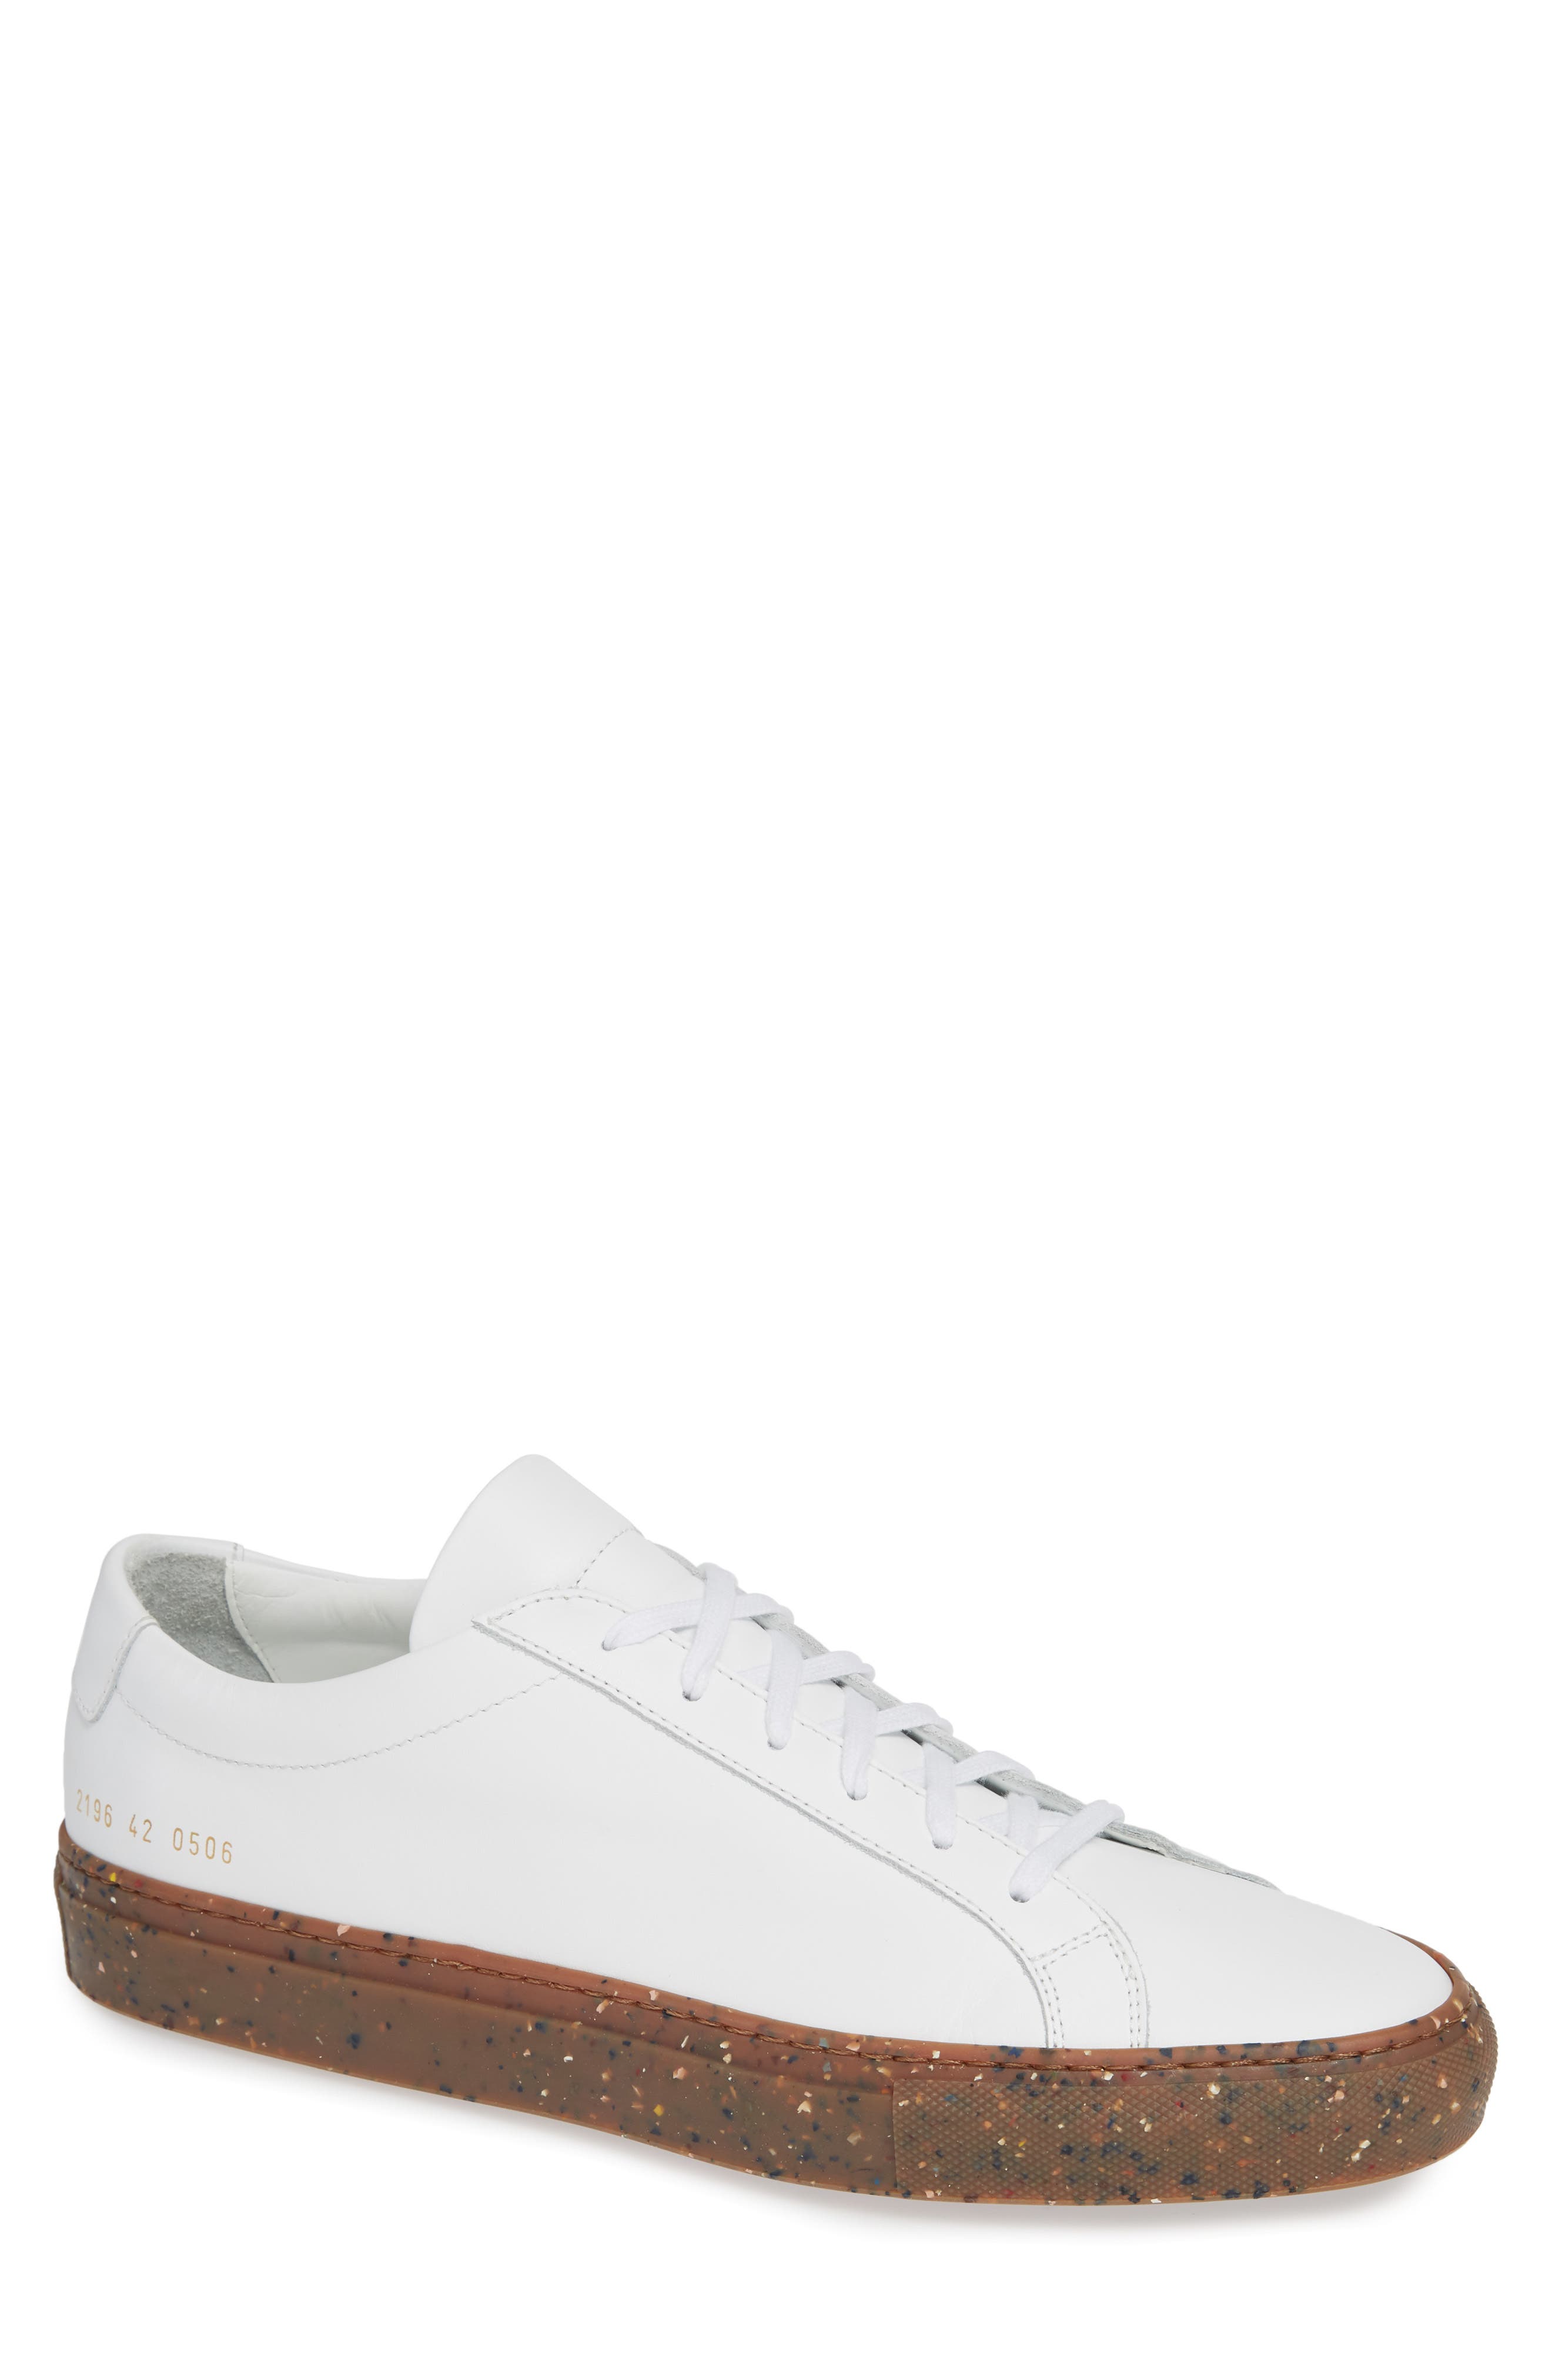 common projects achilles low nordstrom